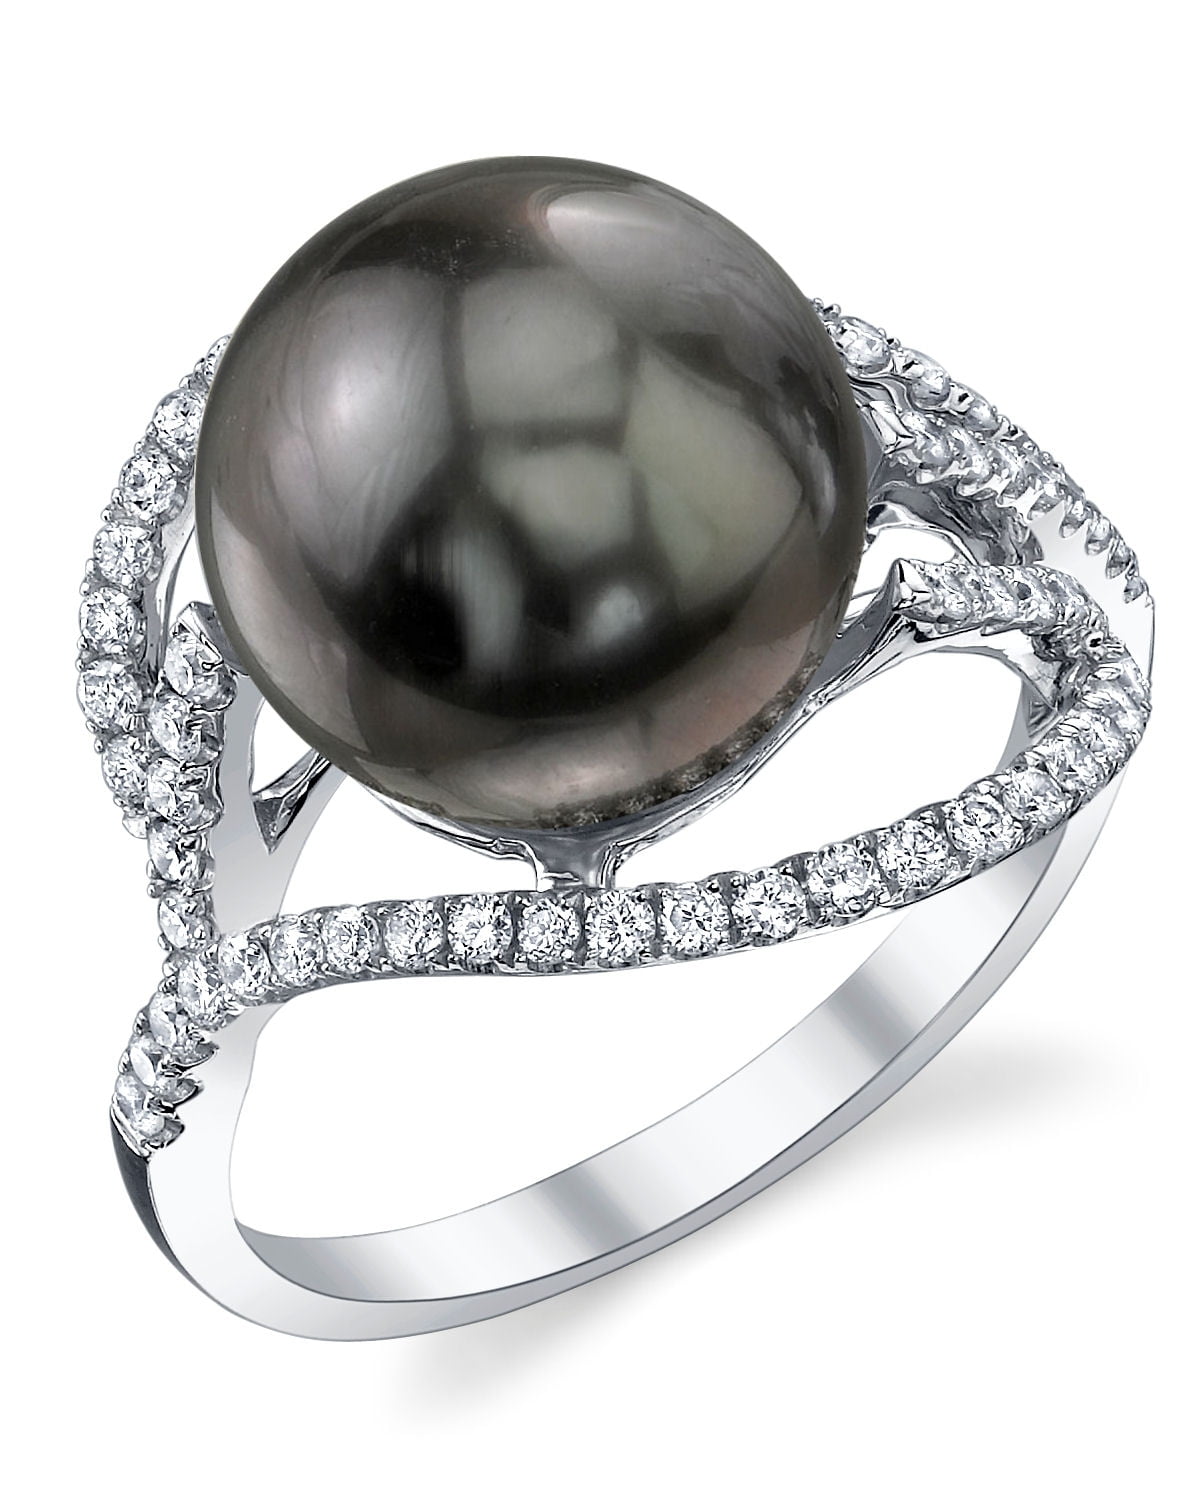 Southern Magnolia Tahitian Cultured Pearl and Diamond Ring 18KW - Ashleigh  Branstetter® - Ashleigh Branstetter®